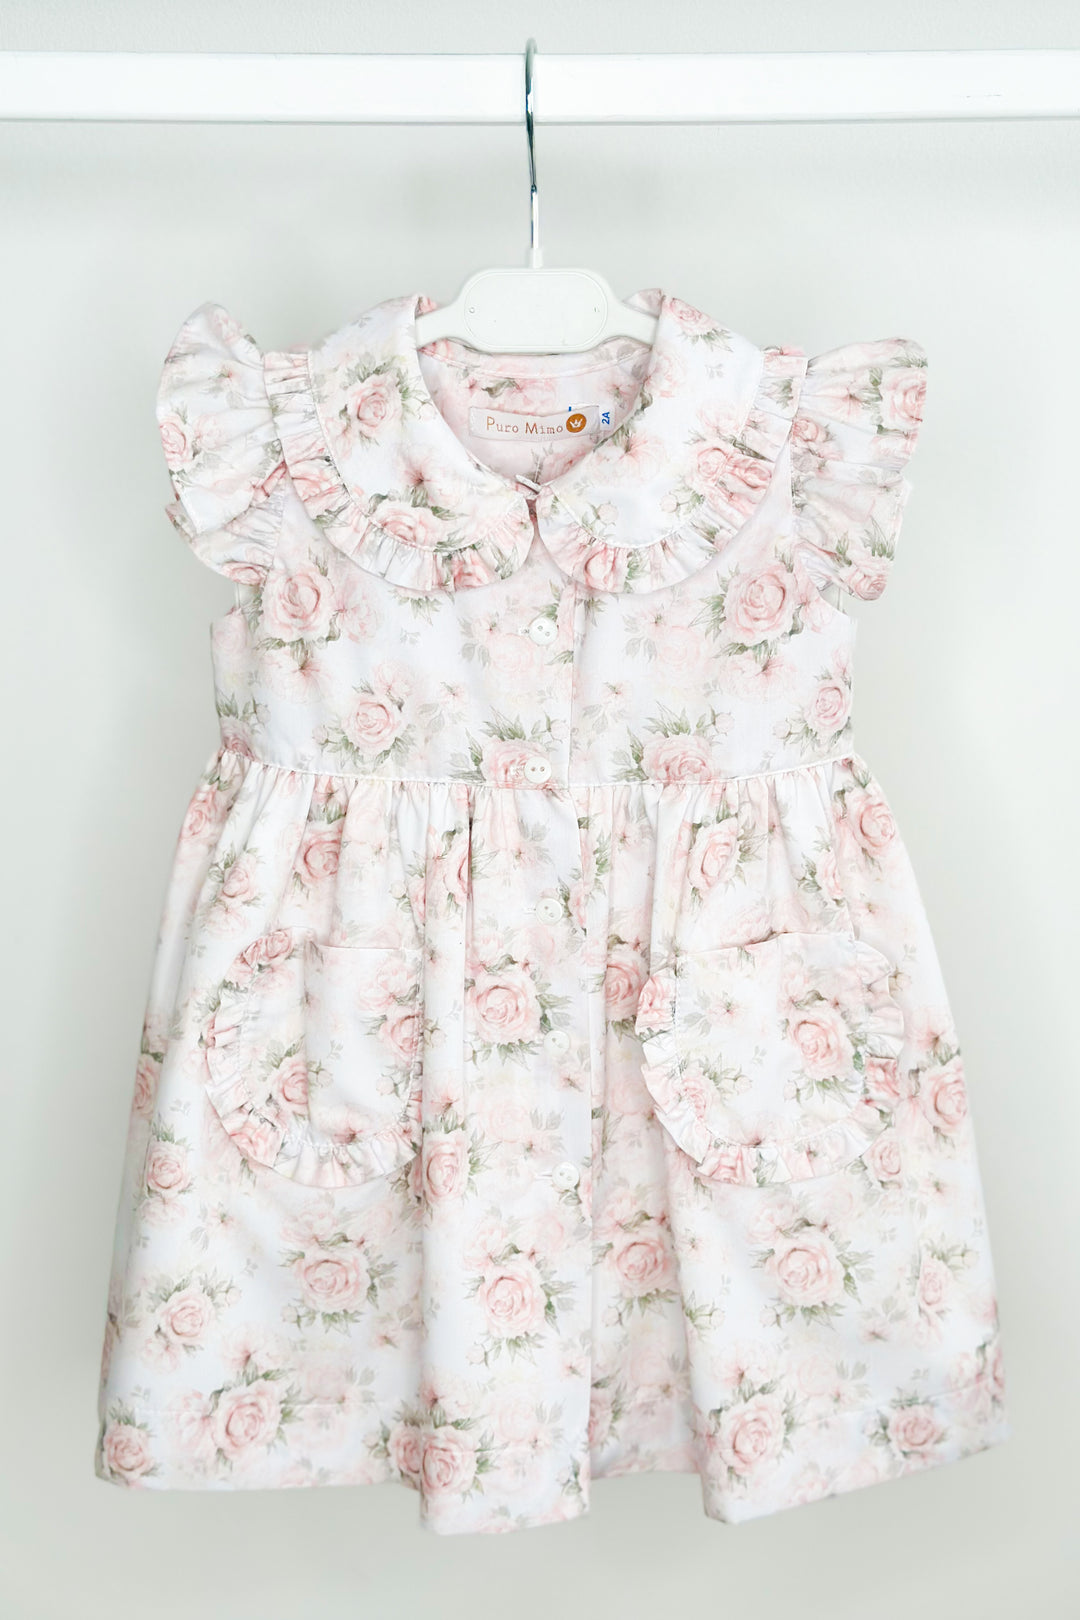 Puro Mimo "Wendy" Pale Pink Vintage Floral Dress | Millie and John